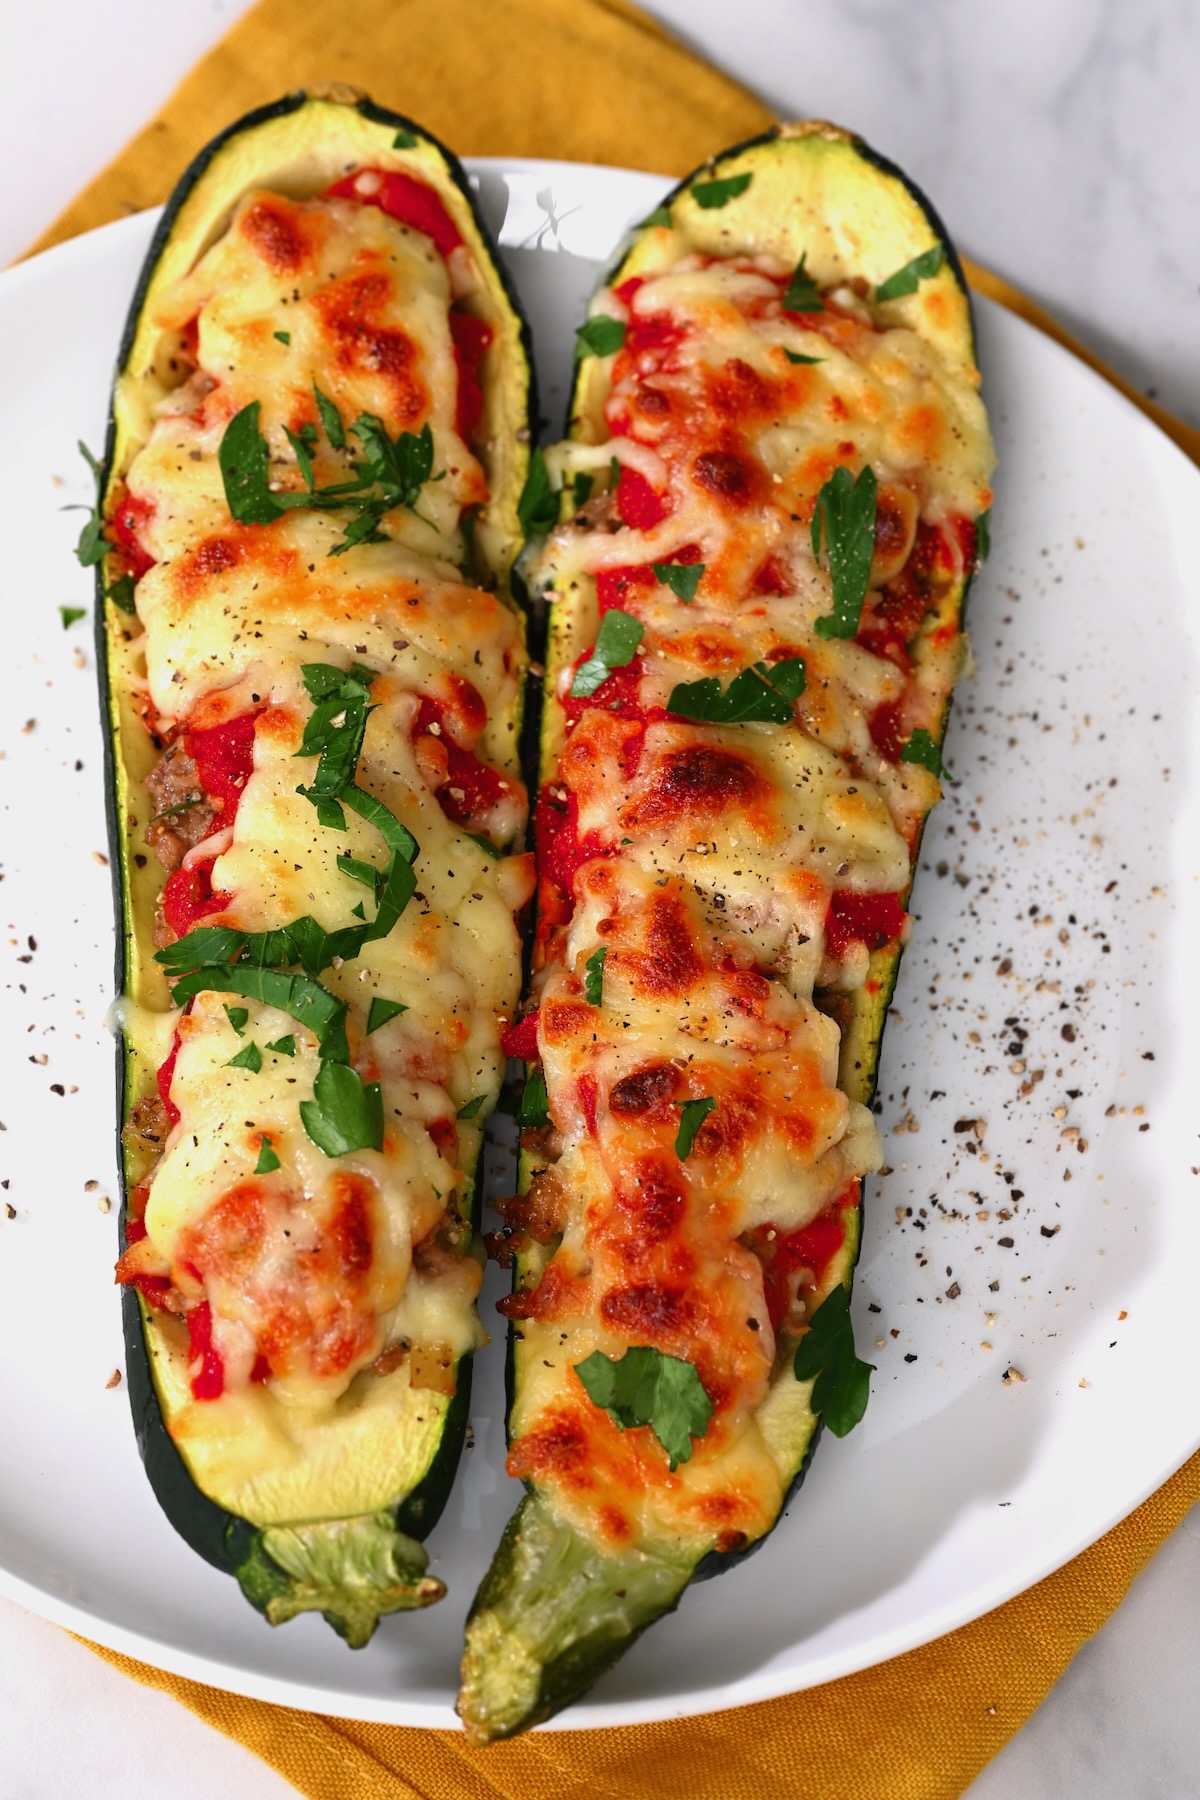 Two halves of stuffed zucchini topped with cheese and parsley